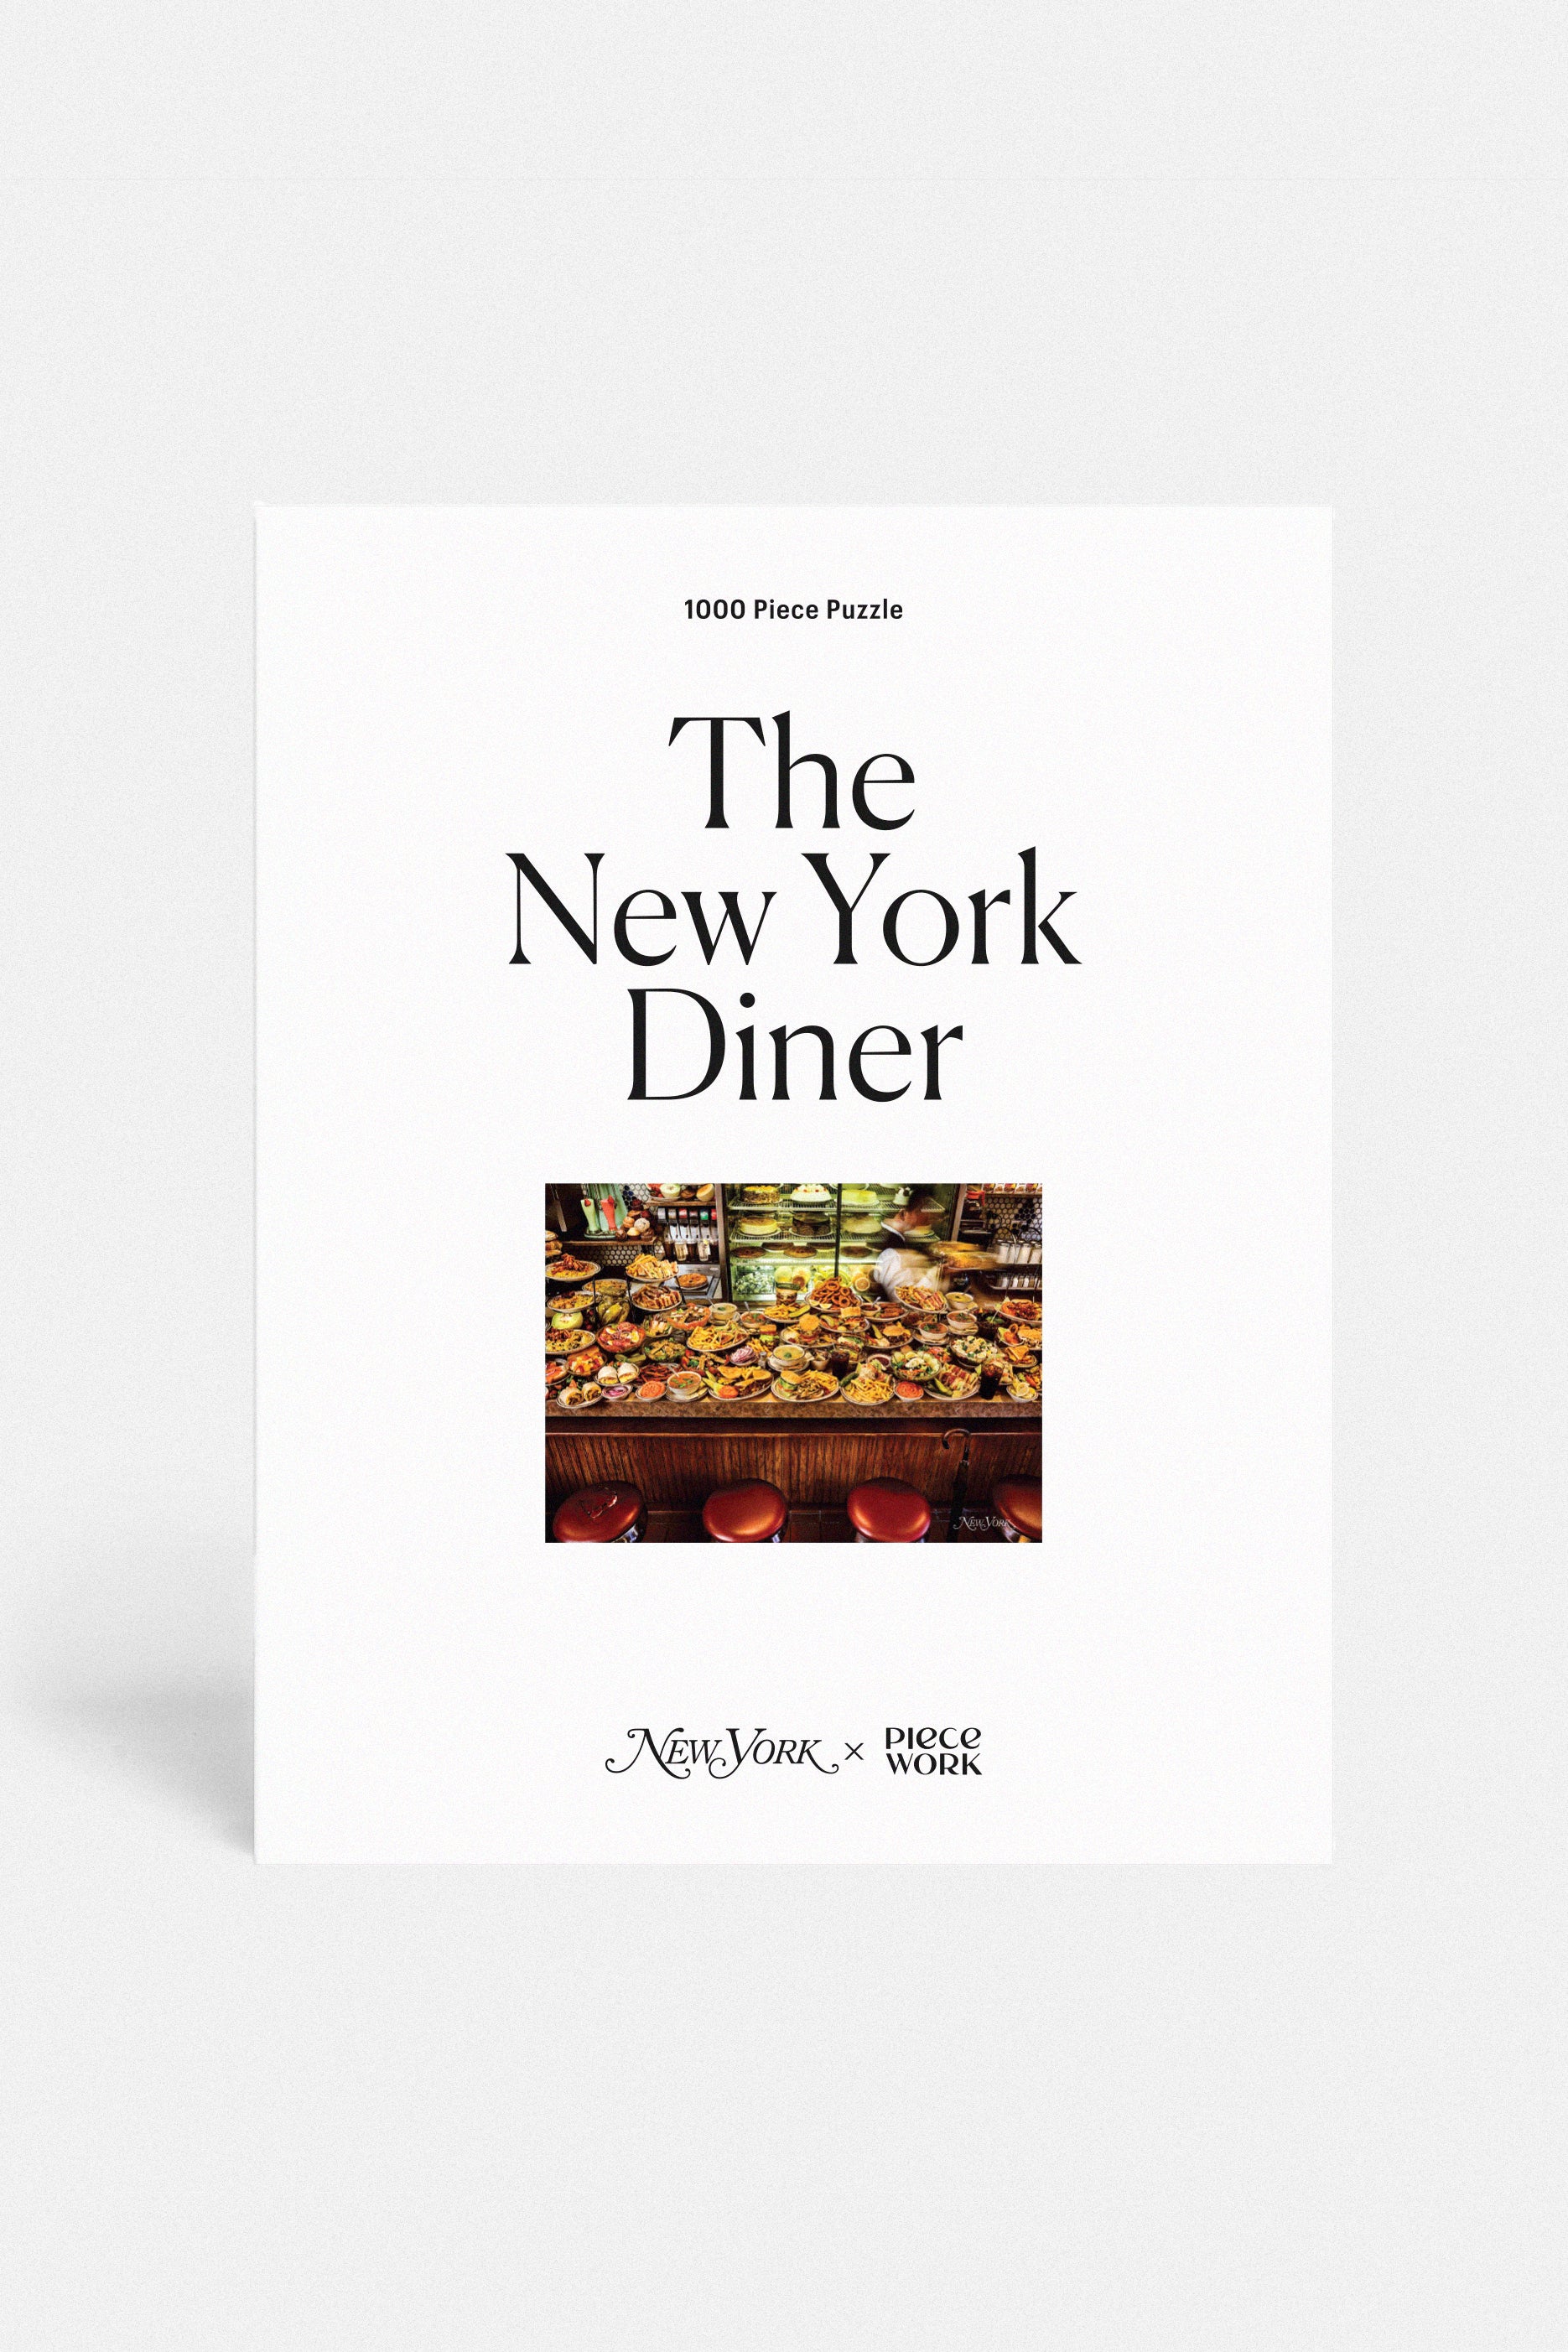 The New York Diner: 1000 Piece Puzzle